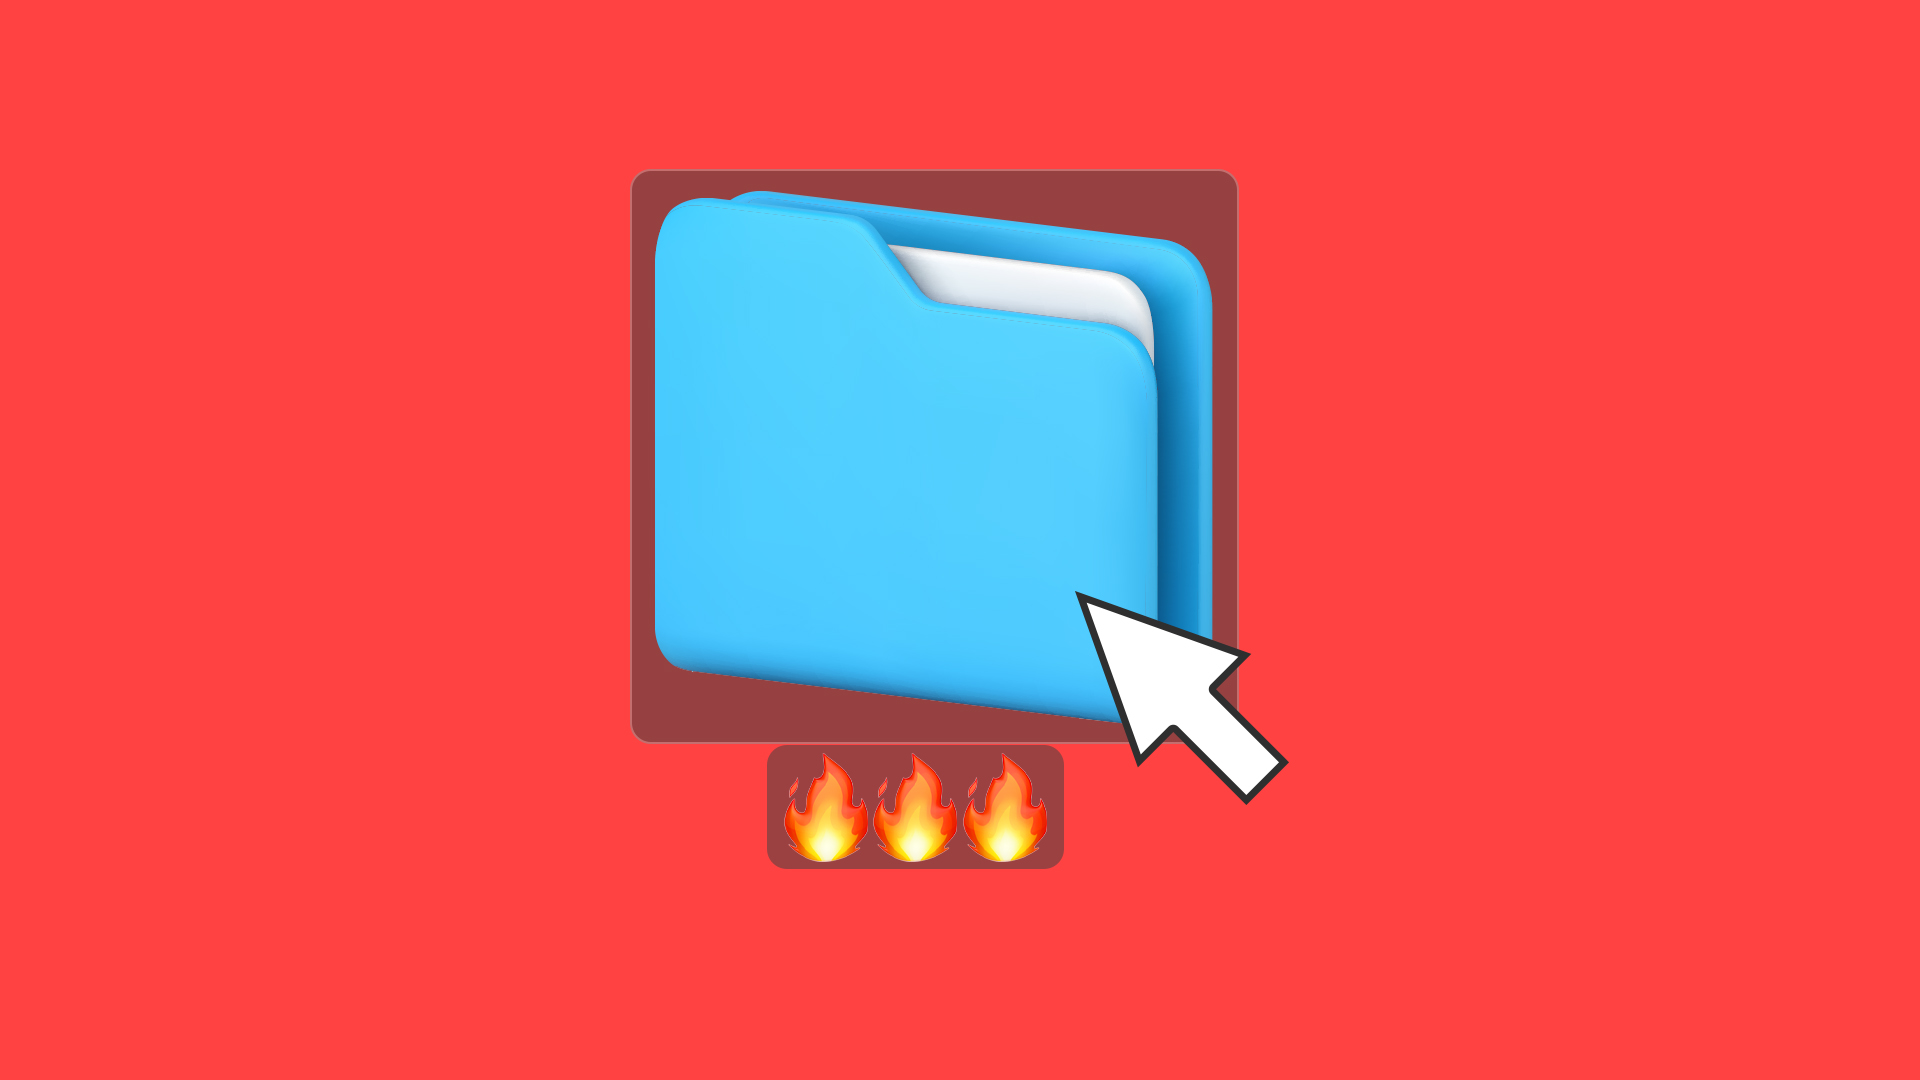 A graphic of the “folder” computer desktop icon, with three fire emojis underneath.